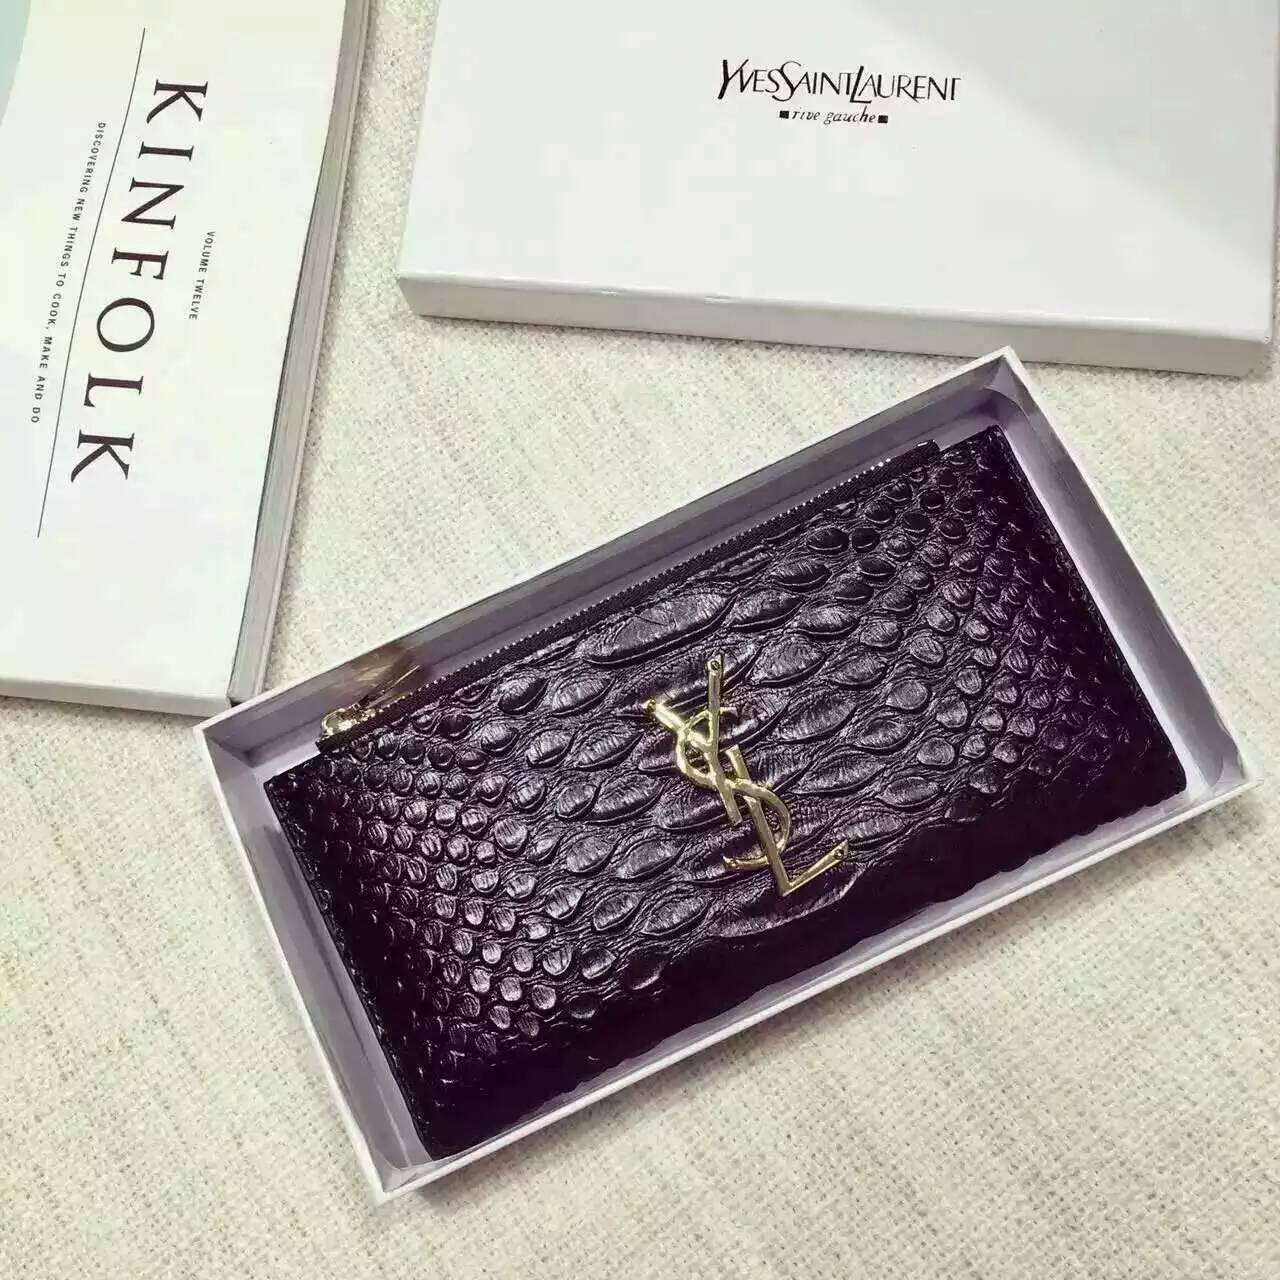 Limited Edition!2016 New Saint Laurent Small Leather Goods Cheap Sale-Saint Laurent Zippy Wallet in Black Python Embossed Leather